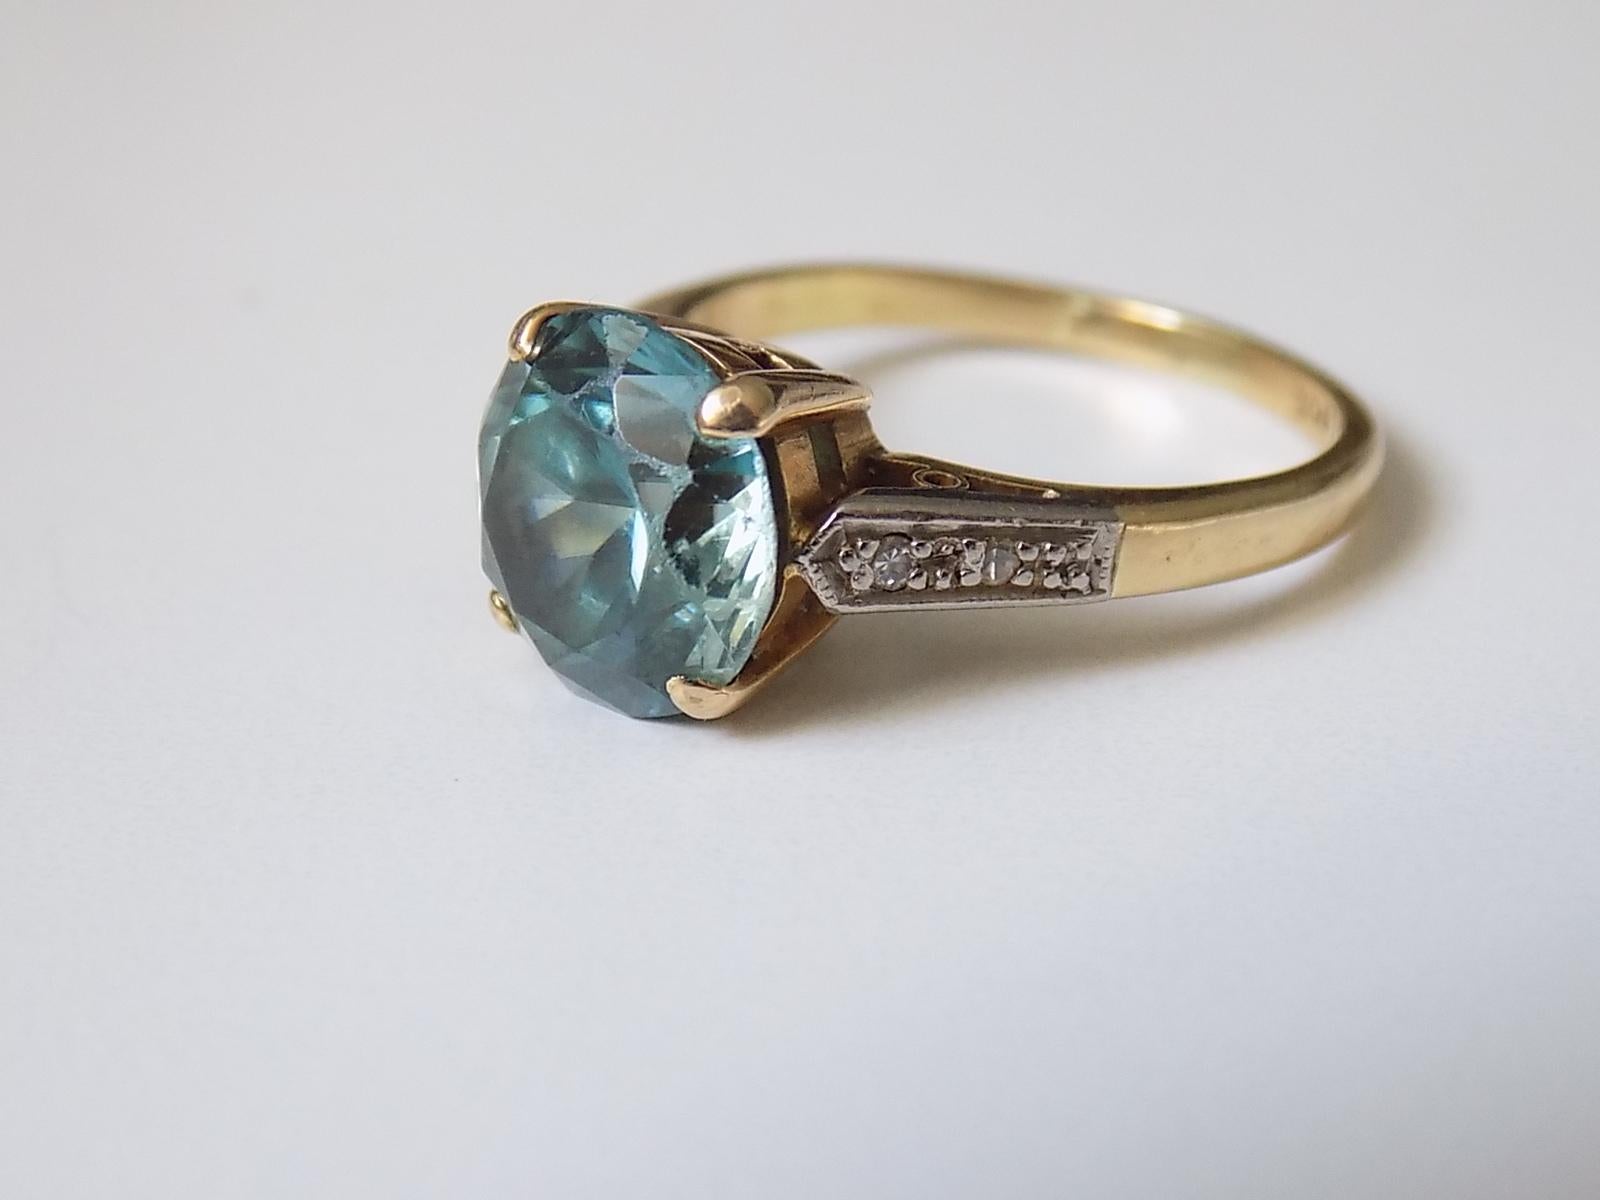 A Stunning Art Deco approx 4 Carat Blue zircon ring in 18 Carat yellow and white gold and on Diamond shoulders. English origin.
Size K UK, 5.5 US.
Height of the face 9mm.
Weight 4.6gr.
Marked 18CT for 18 Carat Gold